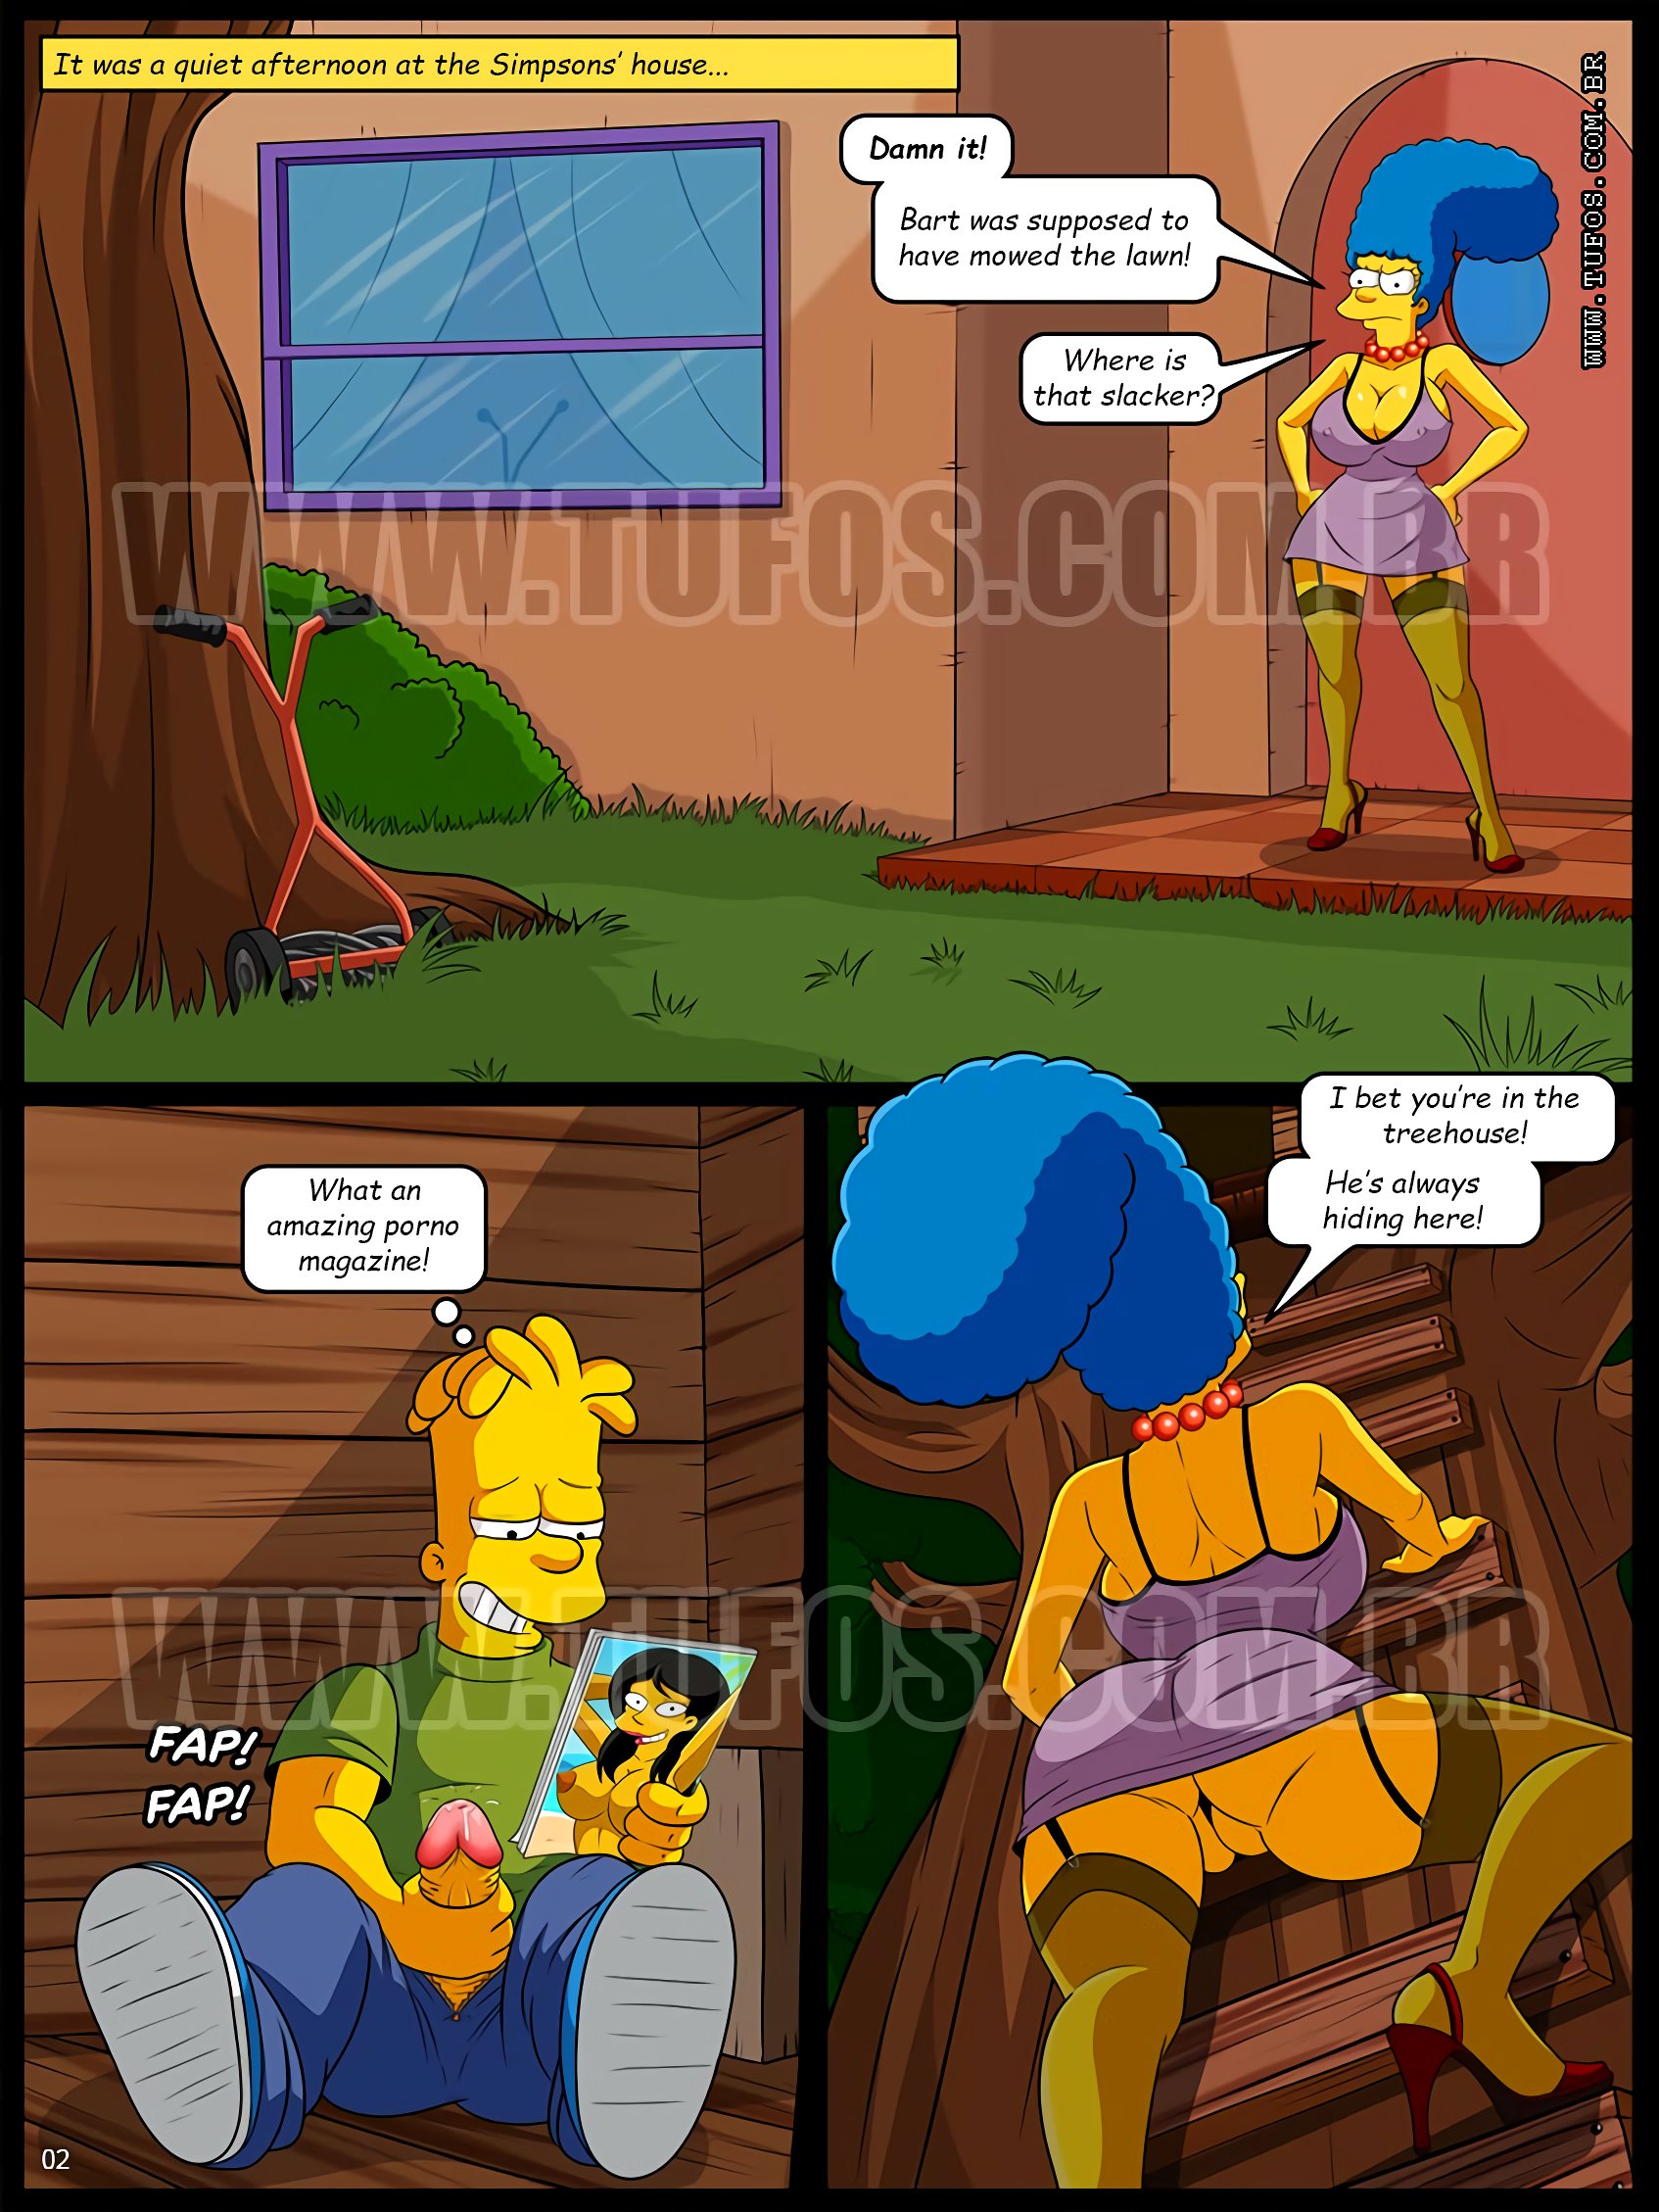 The simpsons in climbing the tree house english porn comics â¤ï¸ Best adult  photos at comics.theothertentacle.com